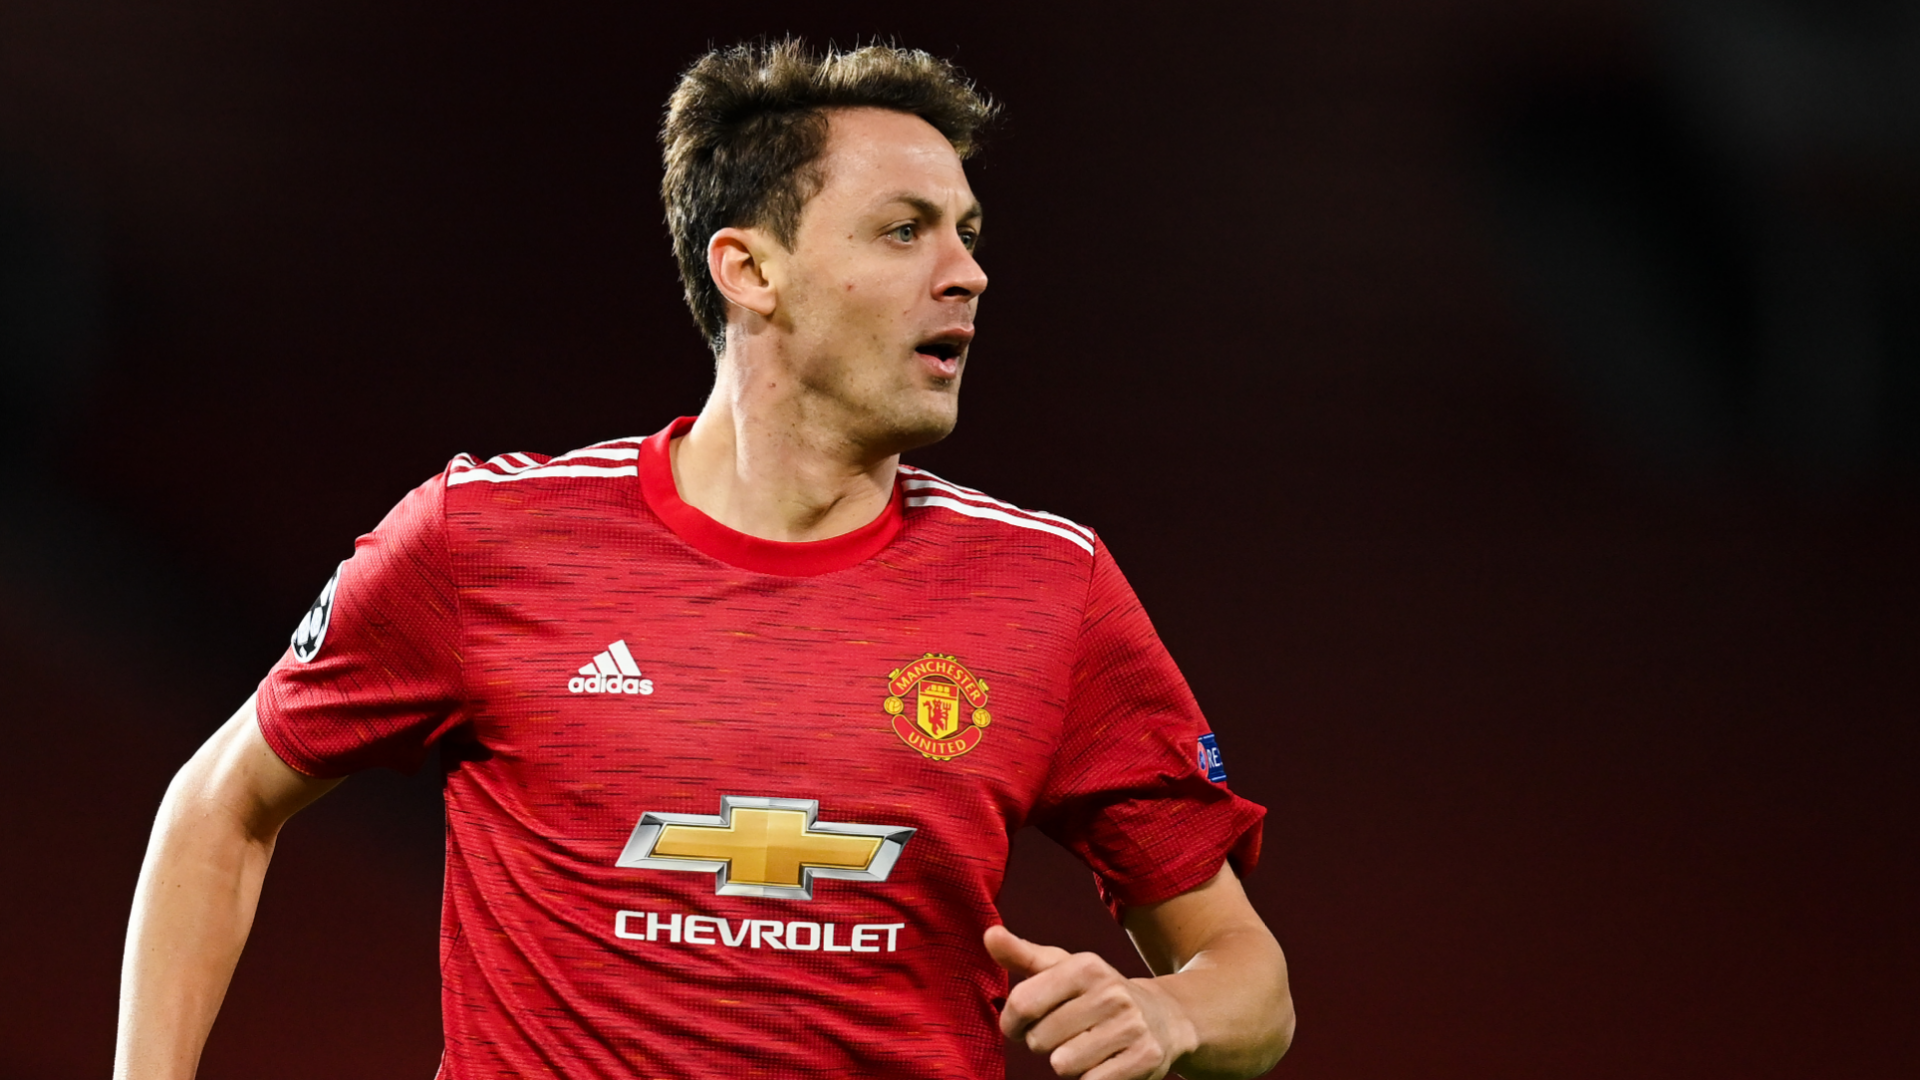 ex-man utd star nemanja matic urges joao neves to snub old trafford move as he makes subtle champions league dig at former club